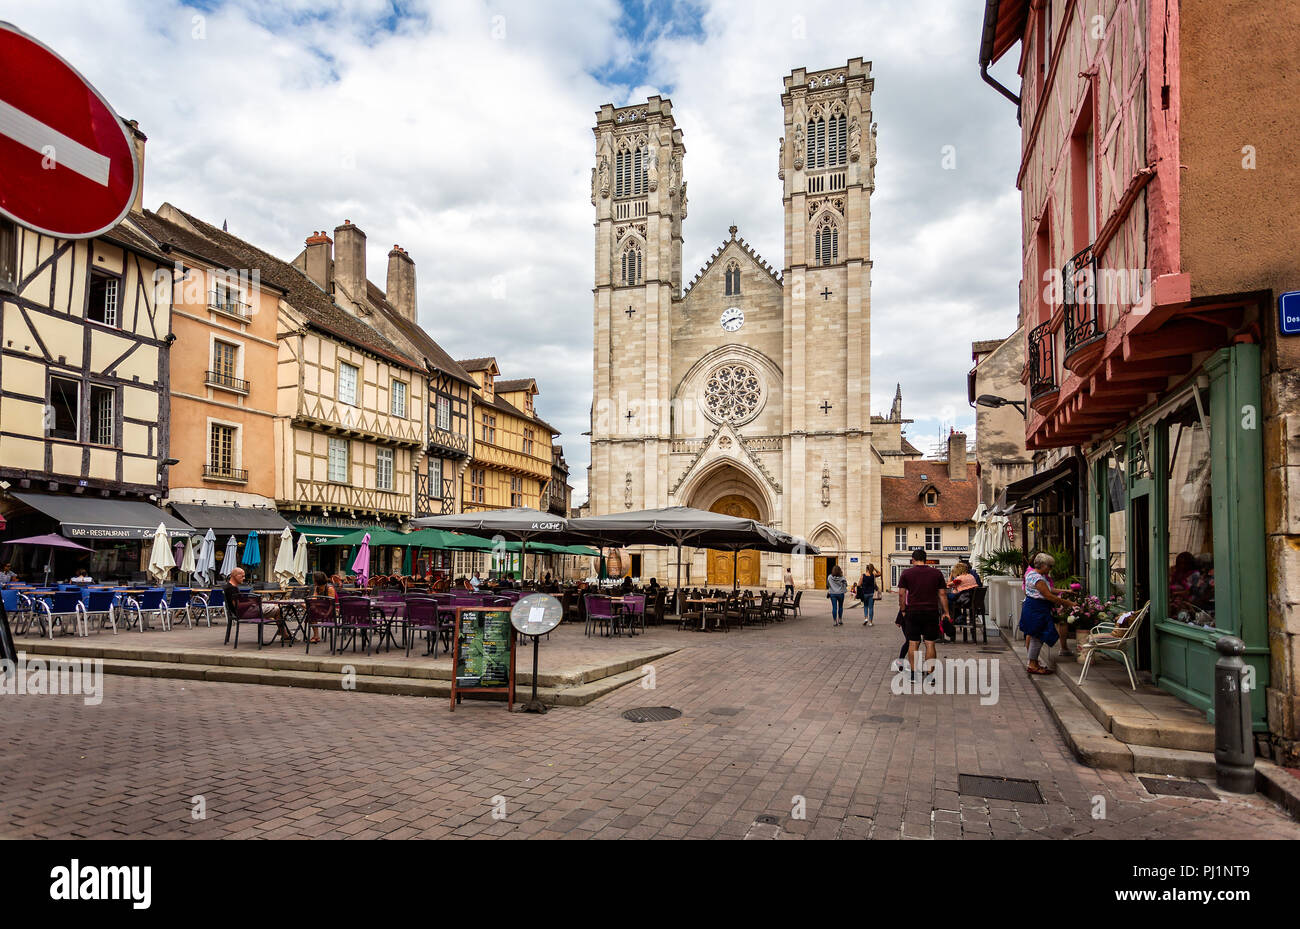 St Vincents Cathedral and cafe culture in Place St Vincent, Chalon sur Saone, Burgundy, France on 29 August 2018 Stock Photo